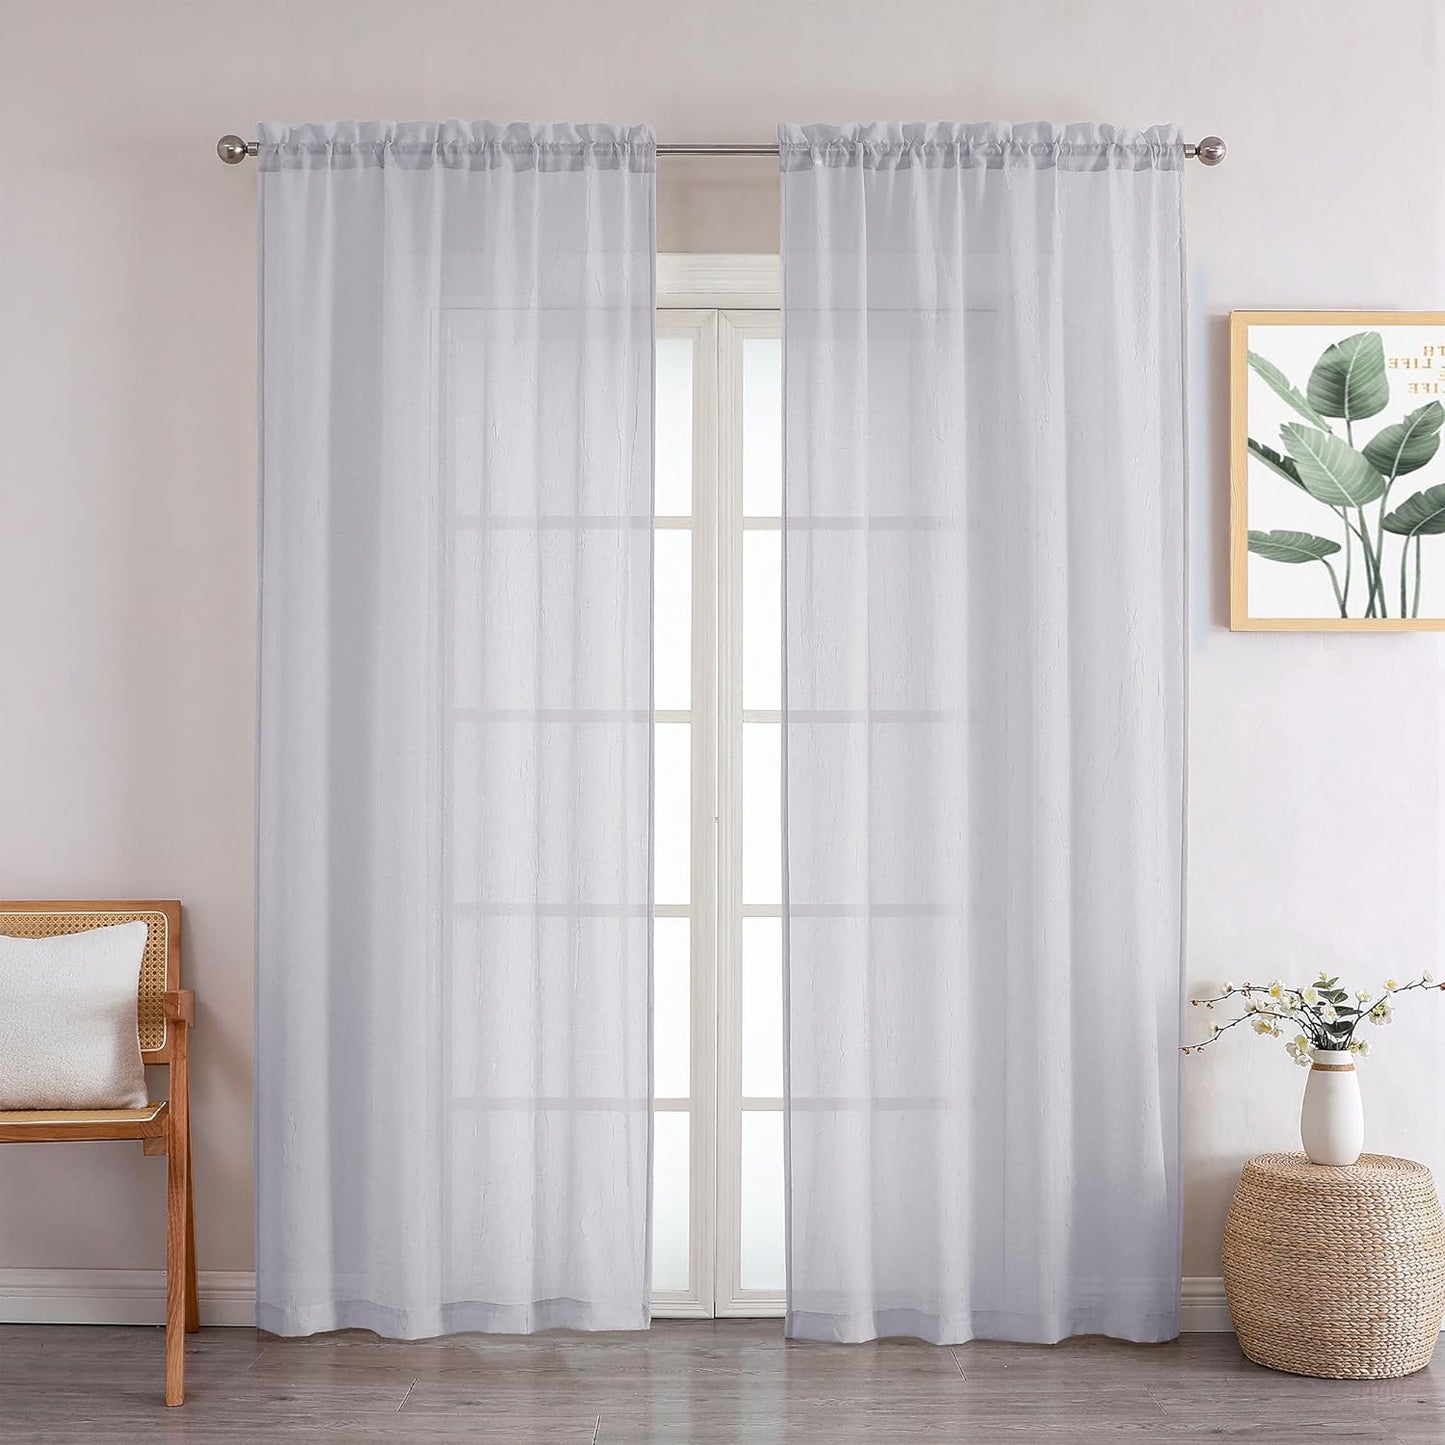 Chyhomenyc Crushed White Sheer Valances for Window 14 Inch Length 2 PCS, Crinkle Voile Short Kitchen Curtains with Dual Rod Pockets，Gauzy Bedroom Curtain Valance，Each 42Wx14L Inches  Chyhomenyc Light Grey 42 W X 72 L 